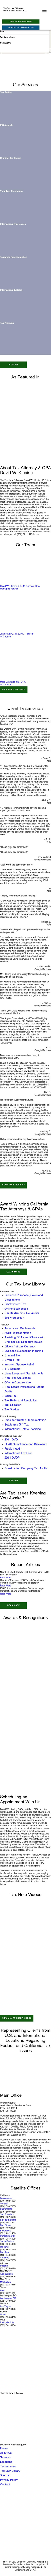 Tax Law Offices of David W. Klasing - Los Angeles CA Lawyers